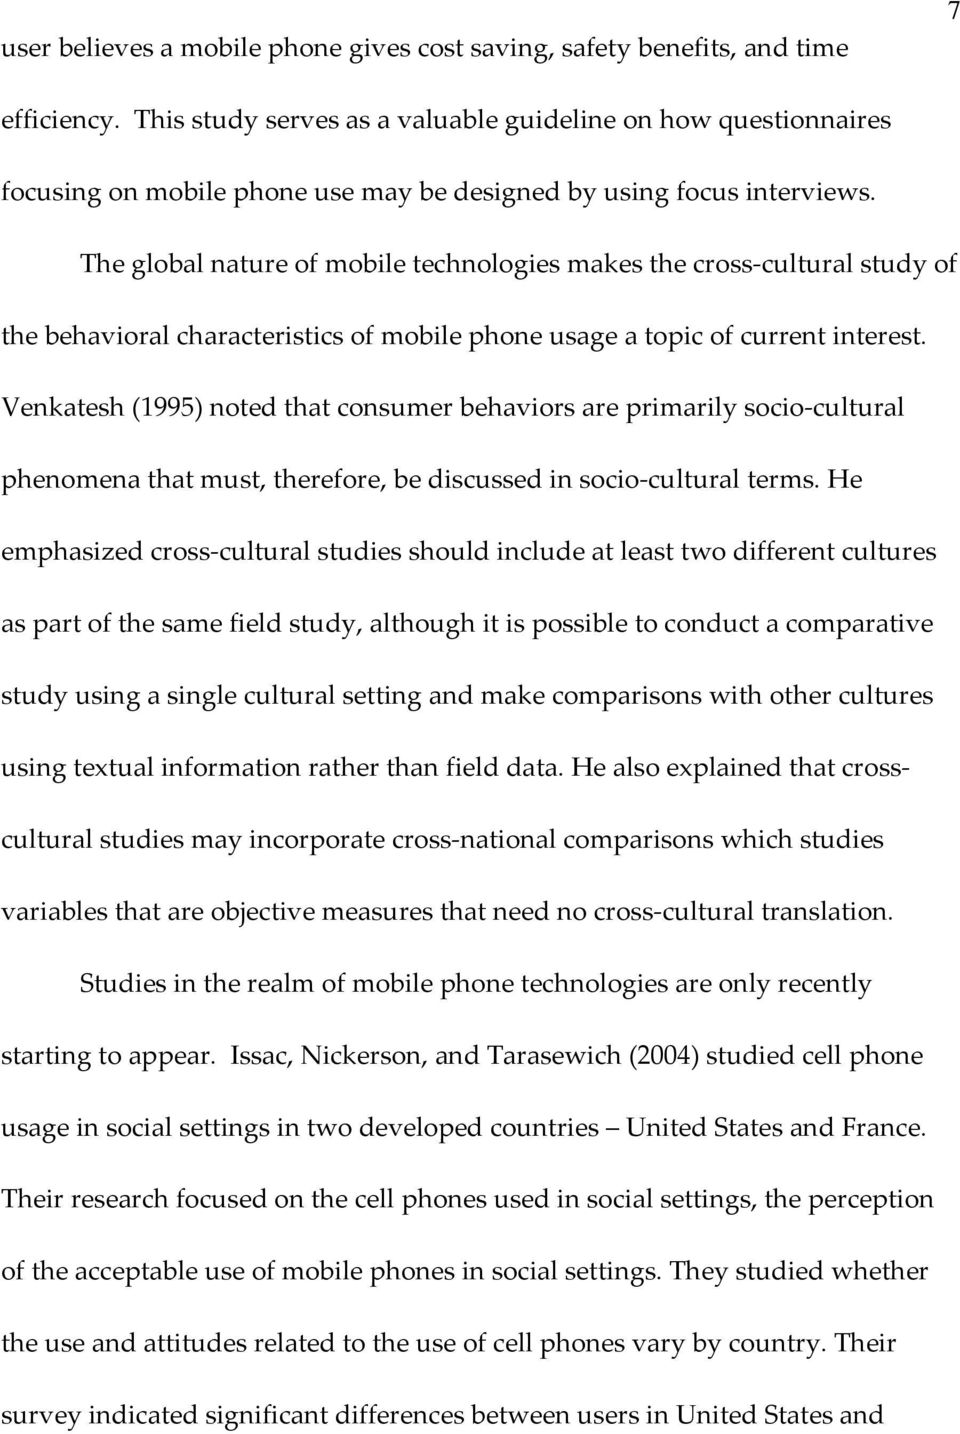 The global nature of mobile technologies makes the cross cultural study of the behavioral characteristics of mobile phone usage a topic of current interest.